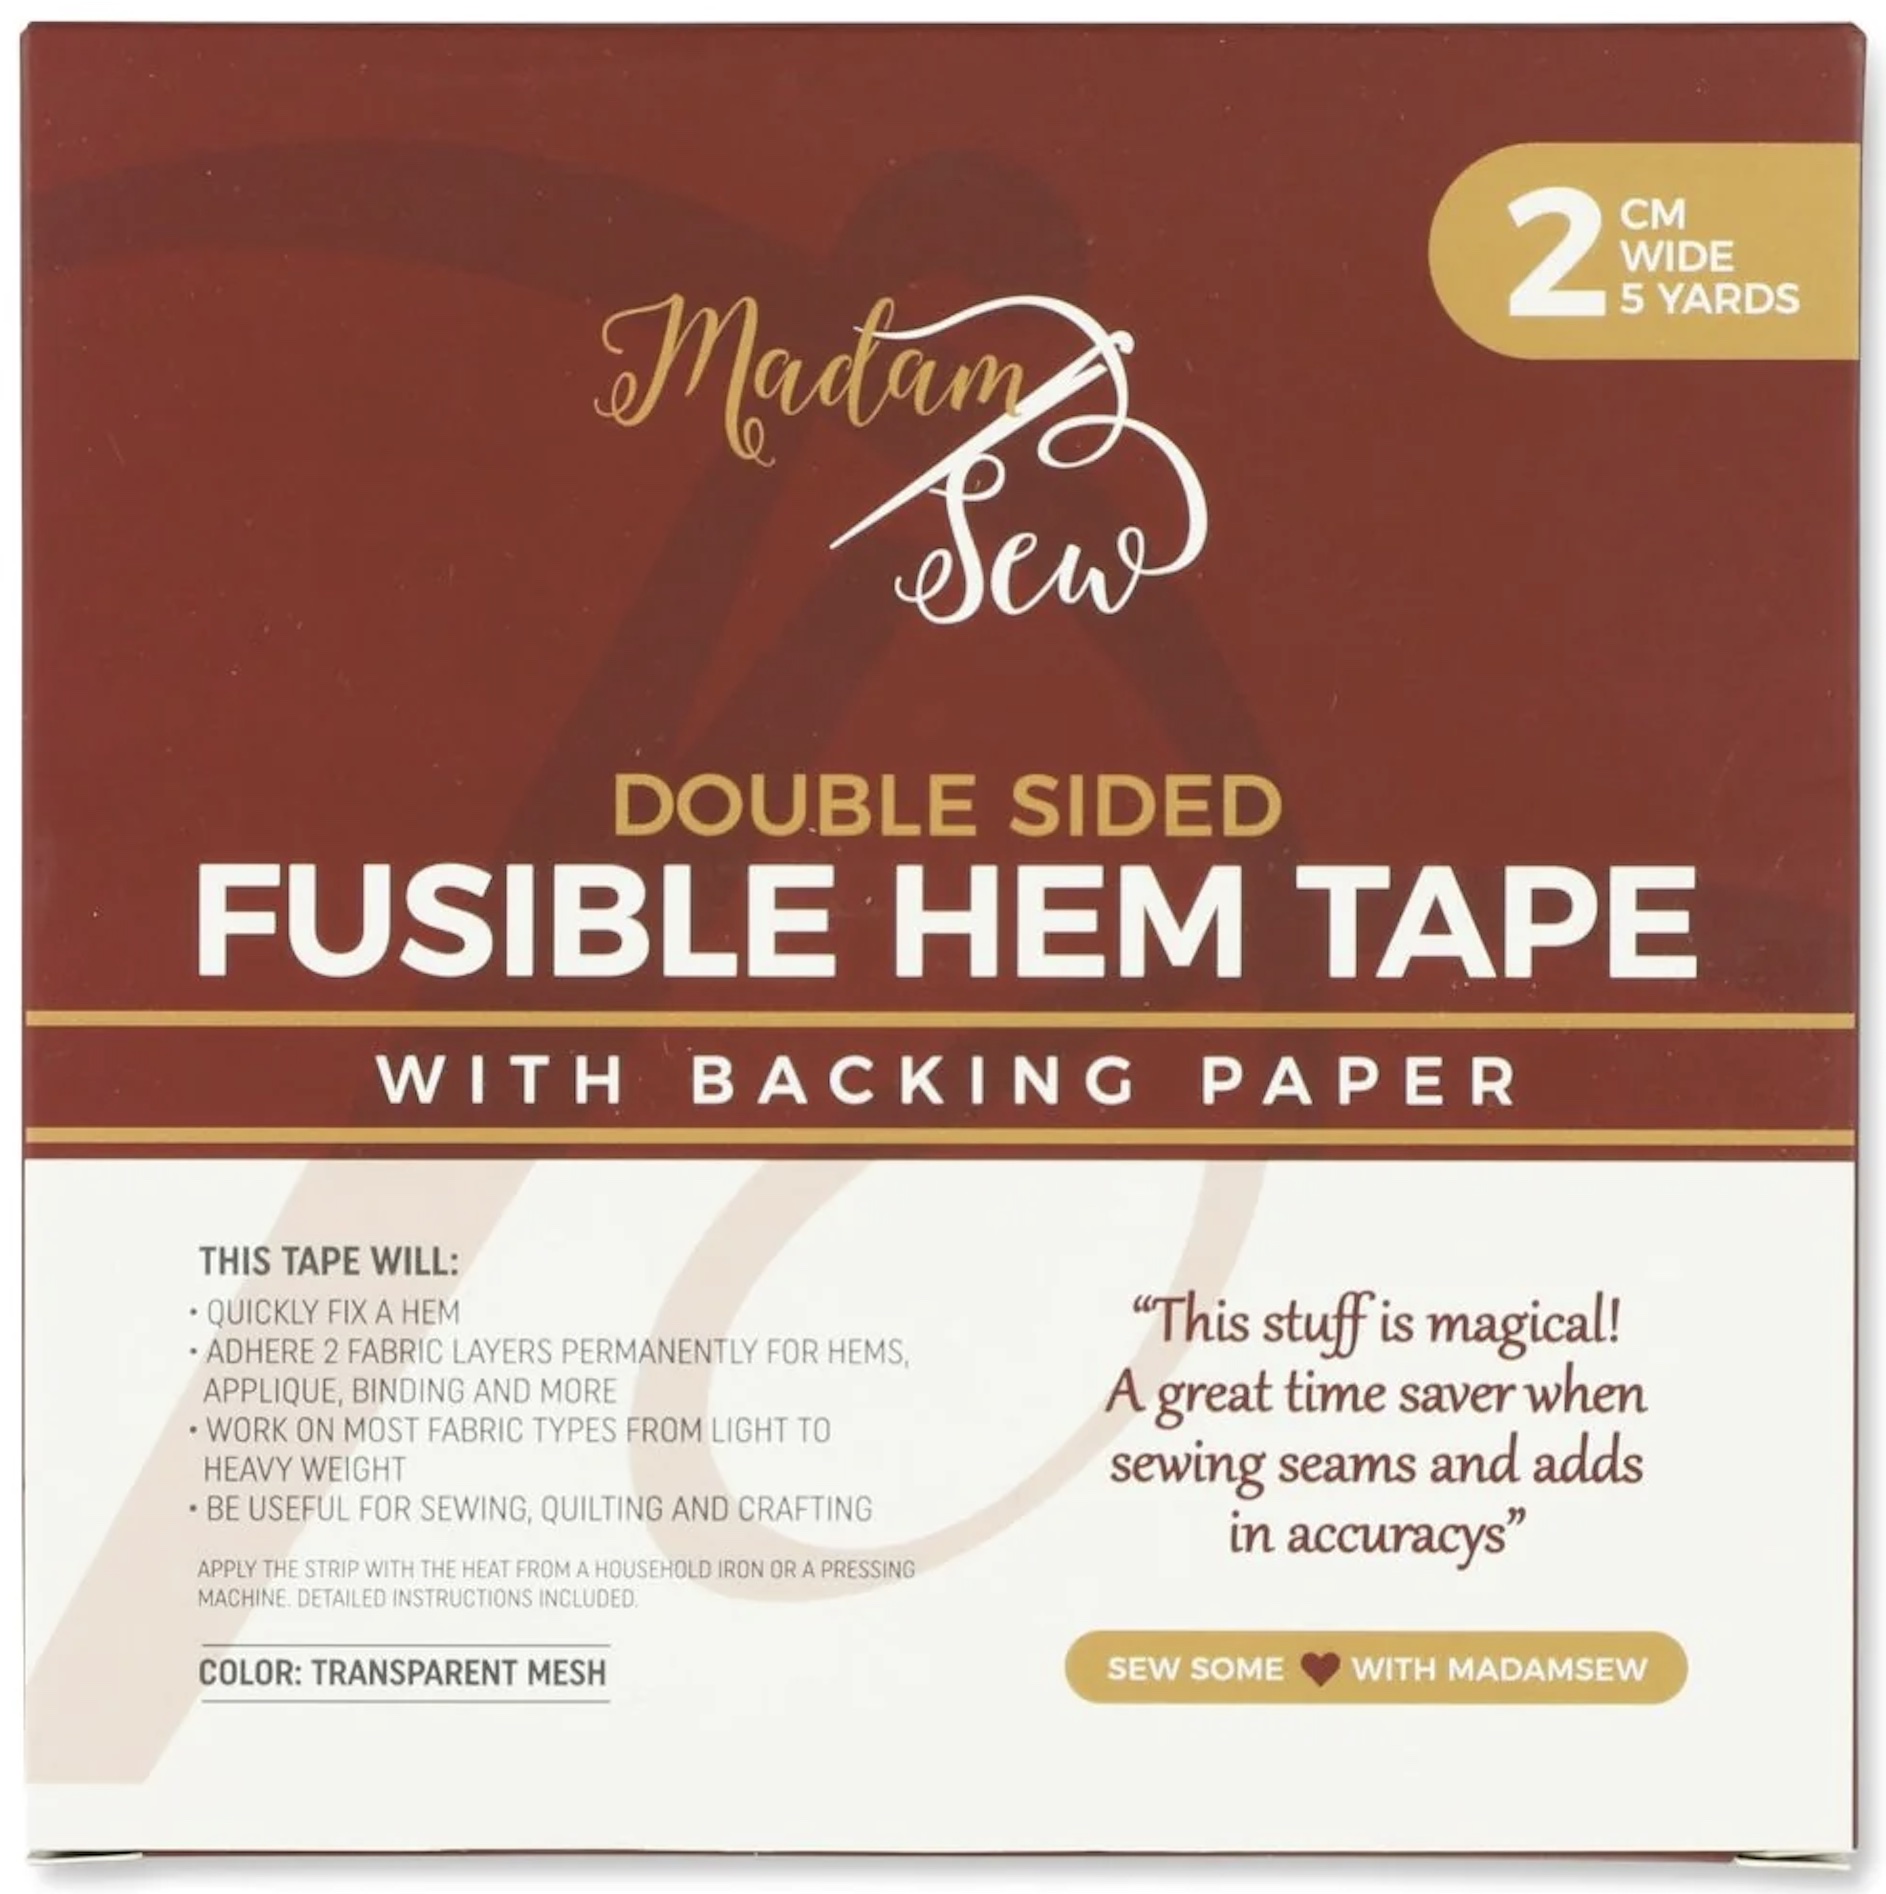 Fusible Hem Tape 2 CM wide by Madam Sew - Front of Package Image - Quiltblox.com